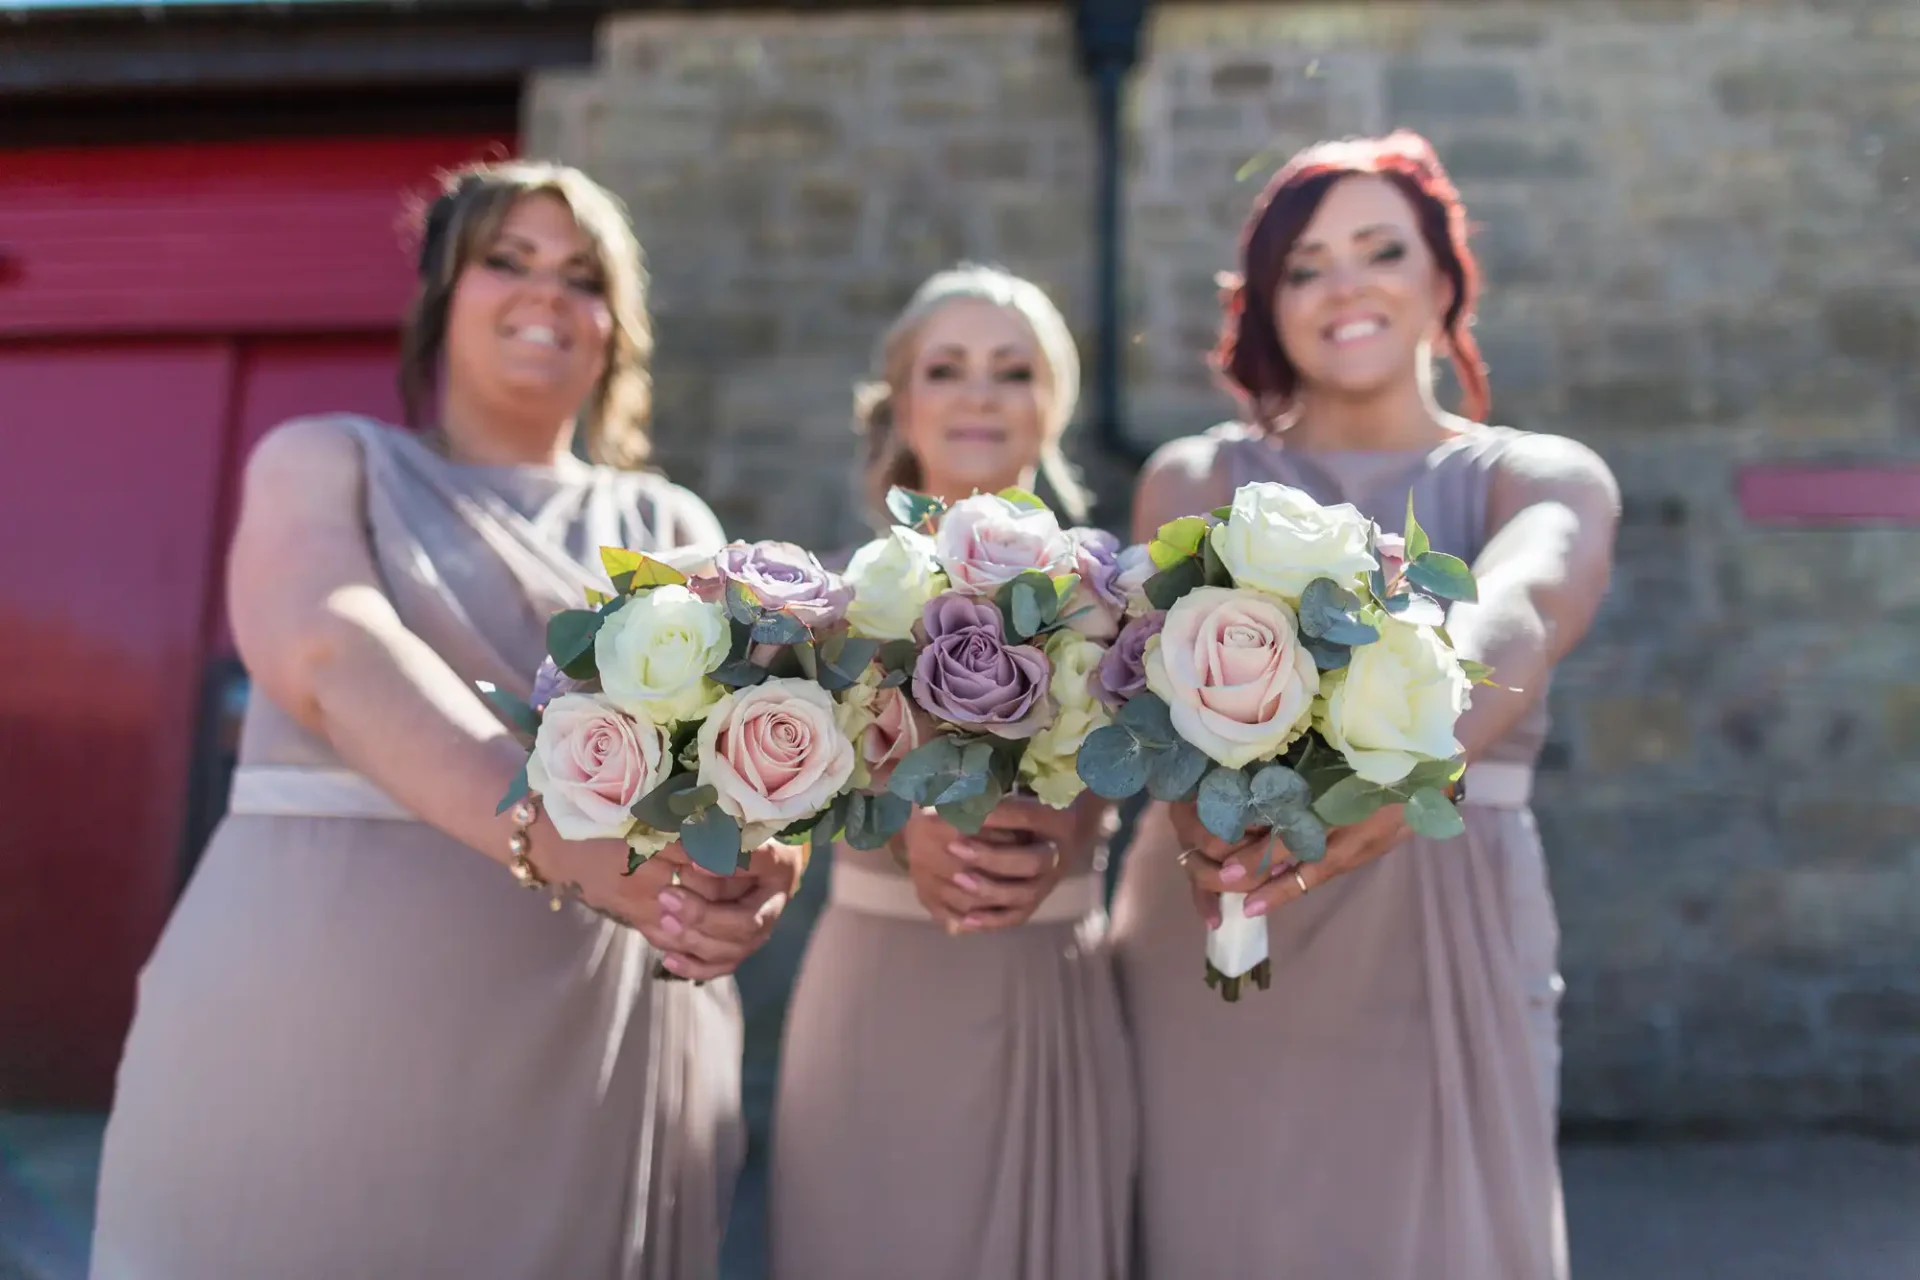 Three bridesmaids in taupe dresses holding bouquets of pink and purple roses, smiling, with a blurred building background.